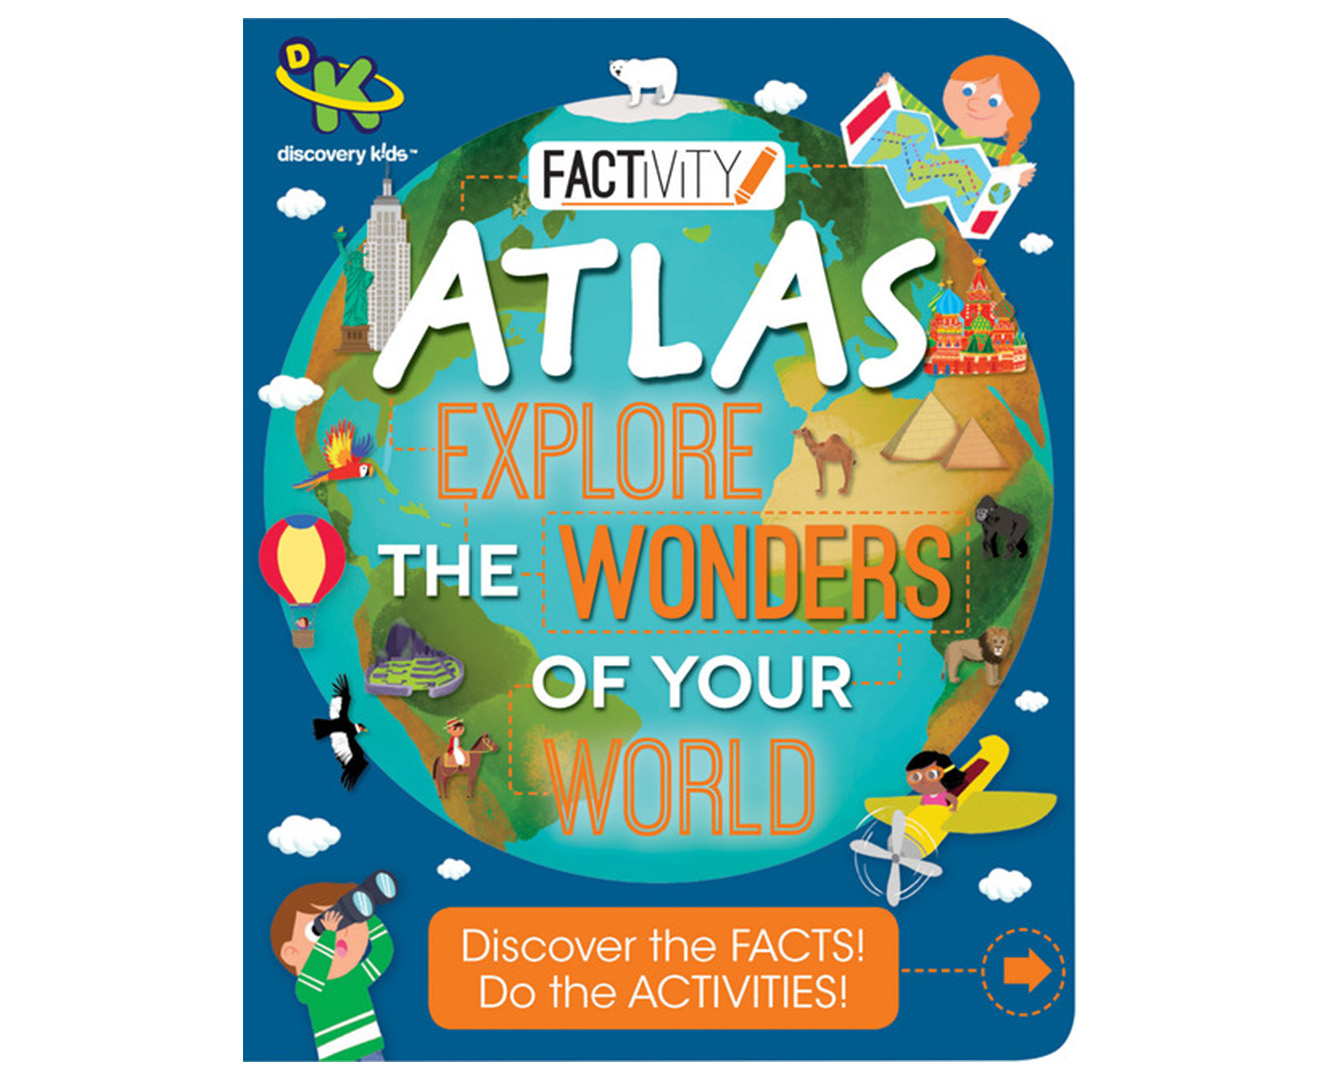 Discovery Kids Factivity Atlas Explore The Wonders Of Your World